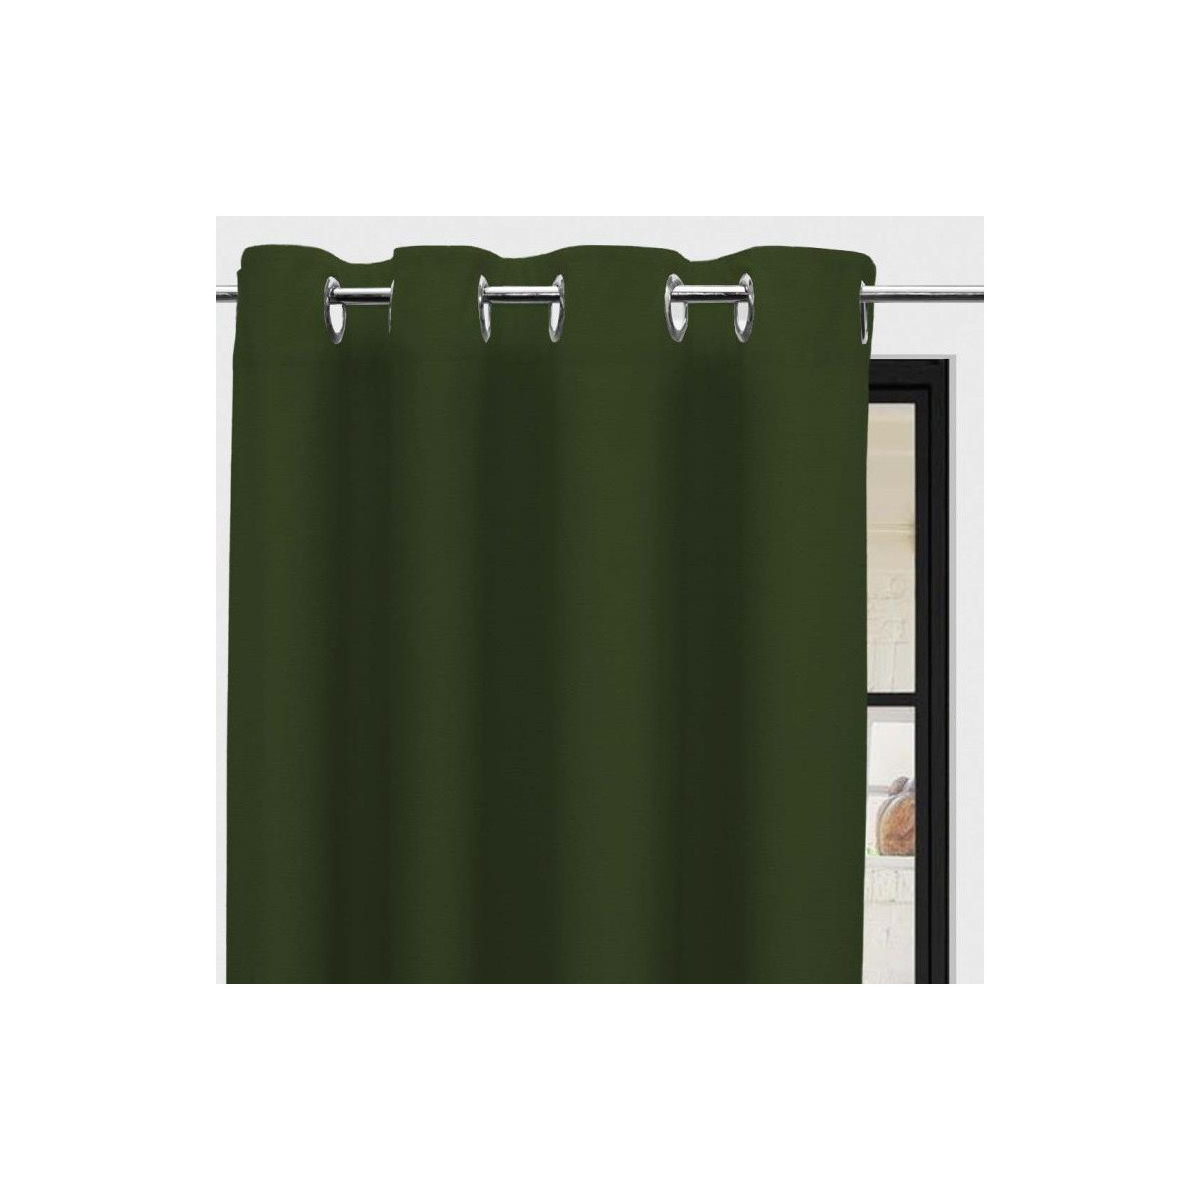 Home Curtains & blinds Soleil D'Ocre PANAMA Green